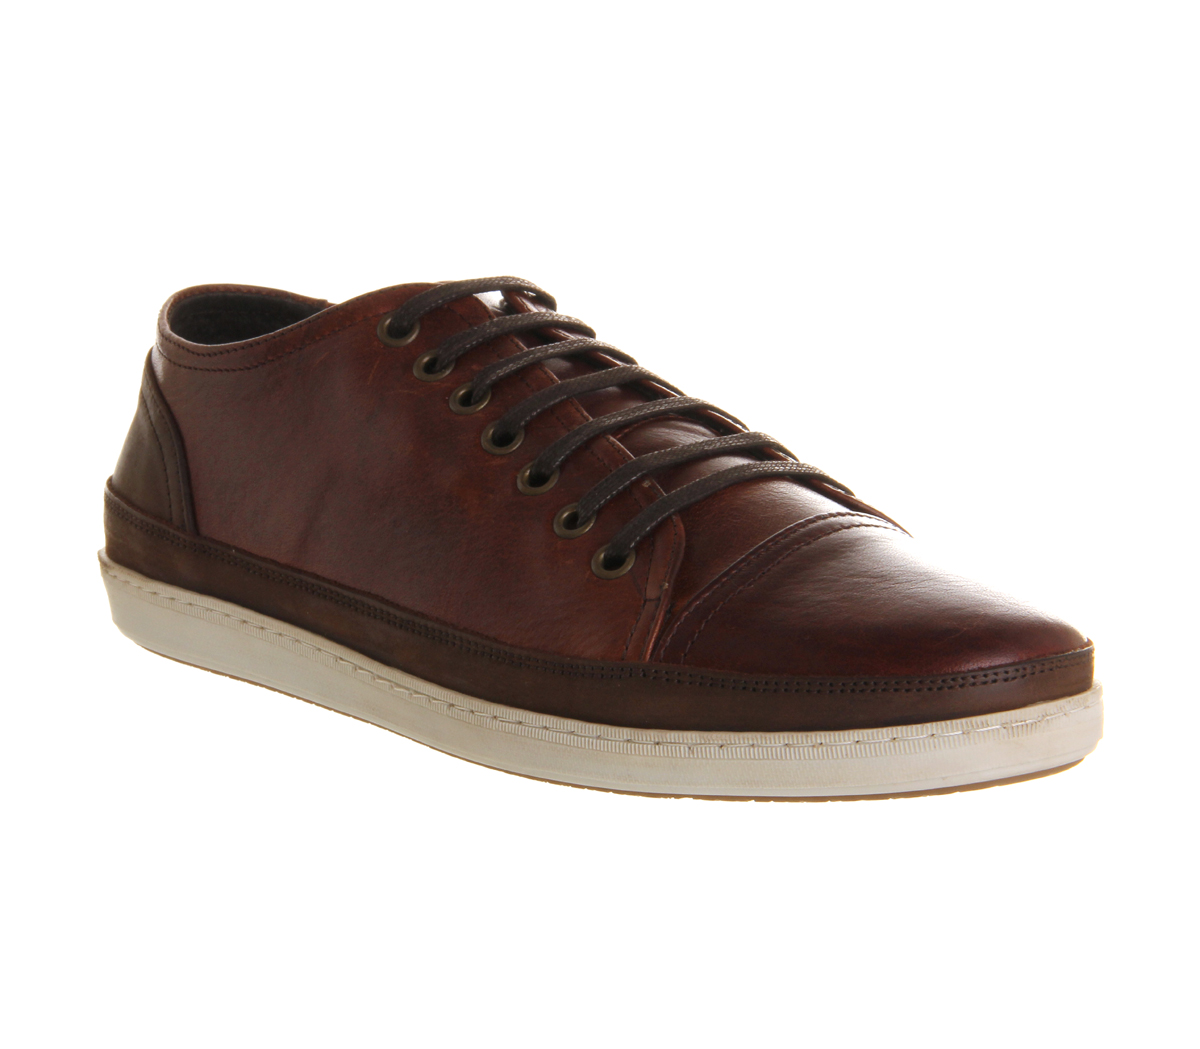 OFFICEShark LaceBrown Leather